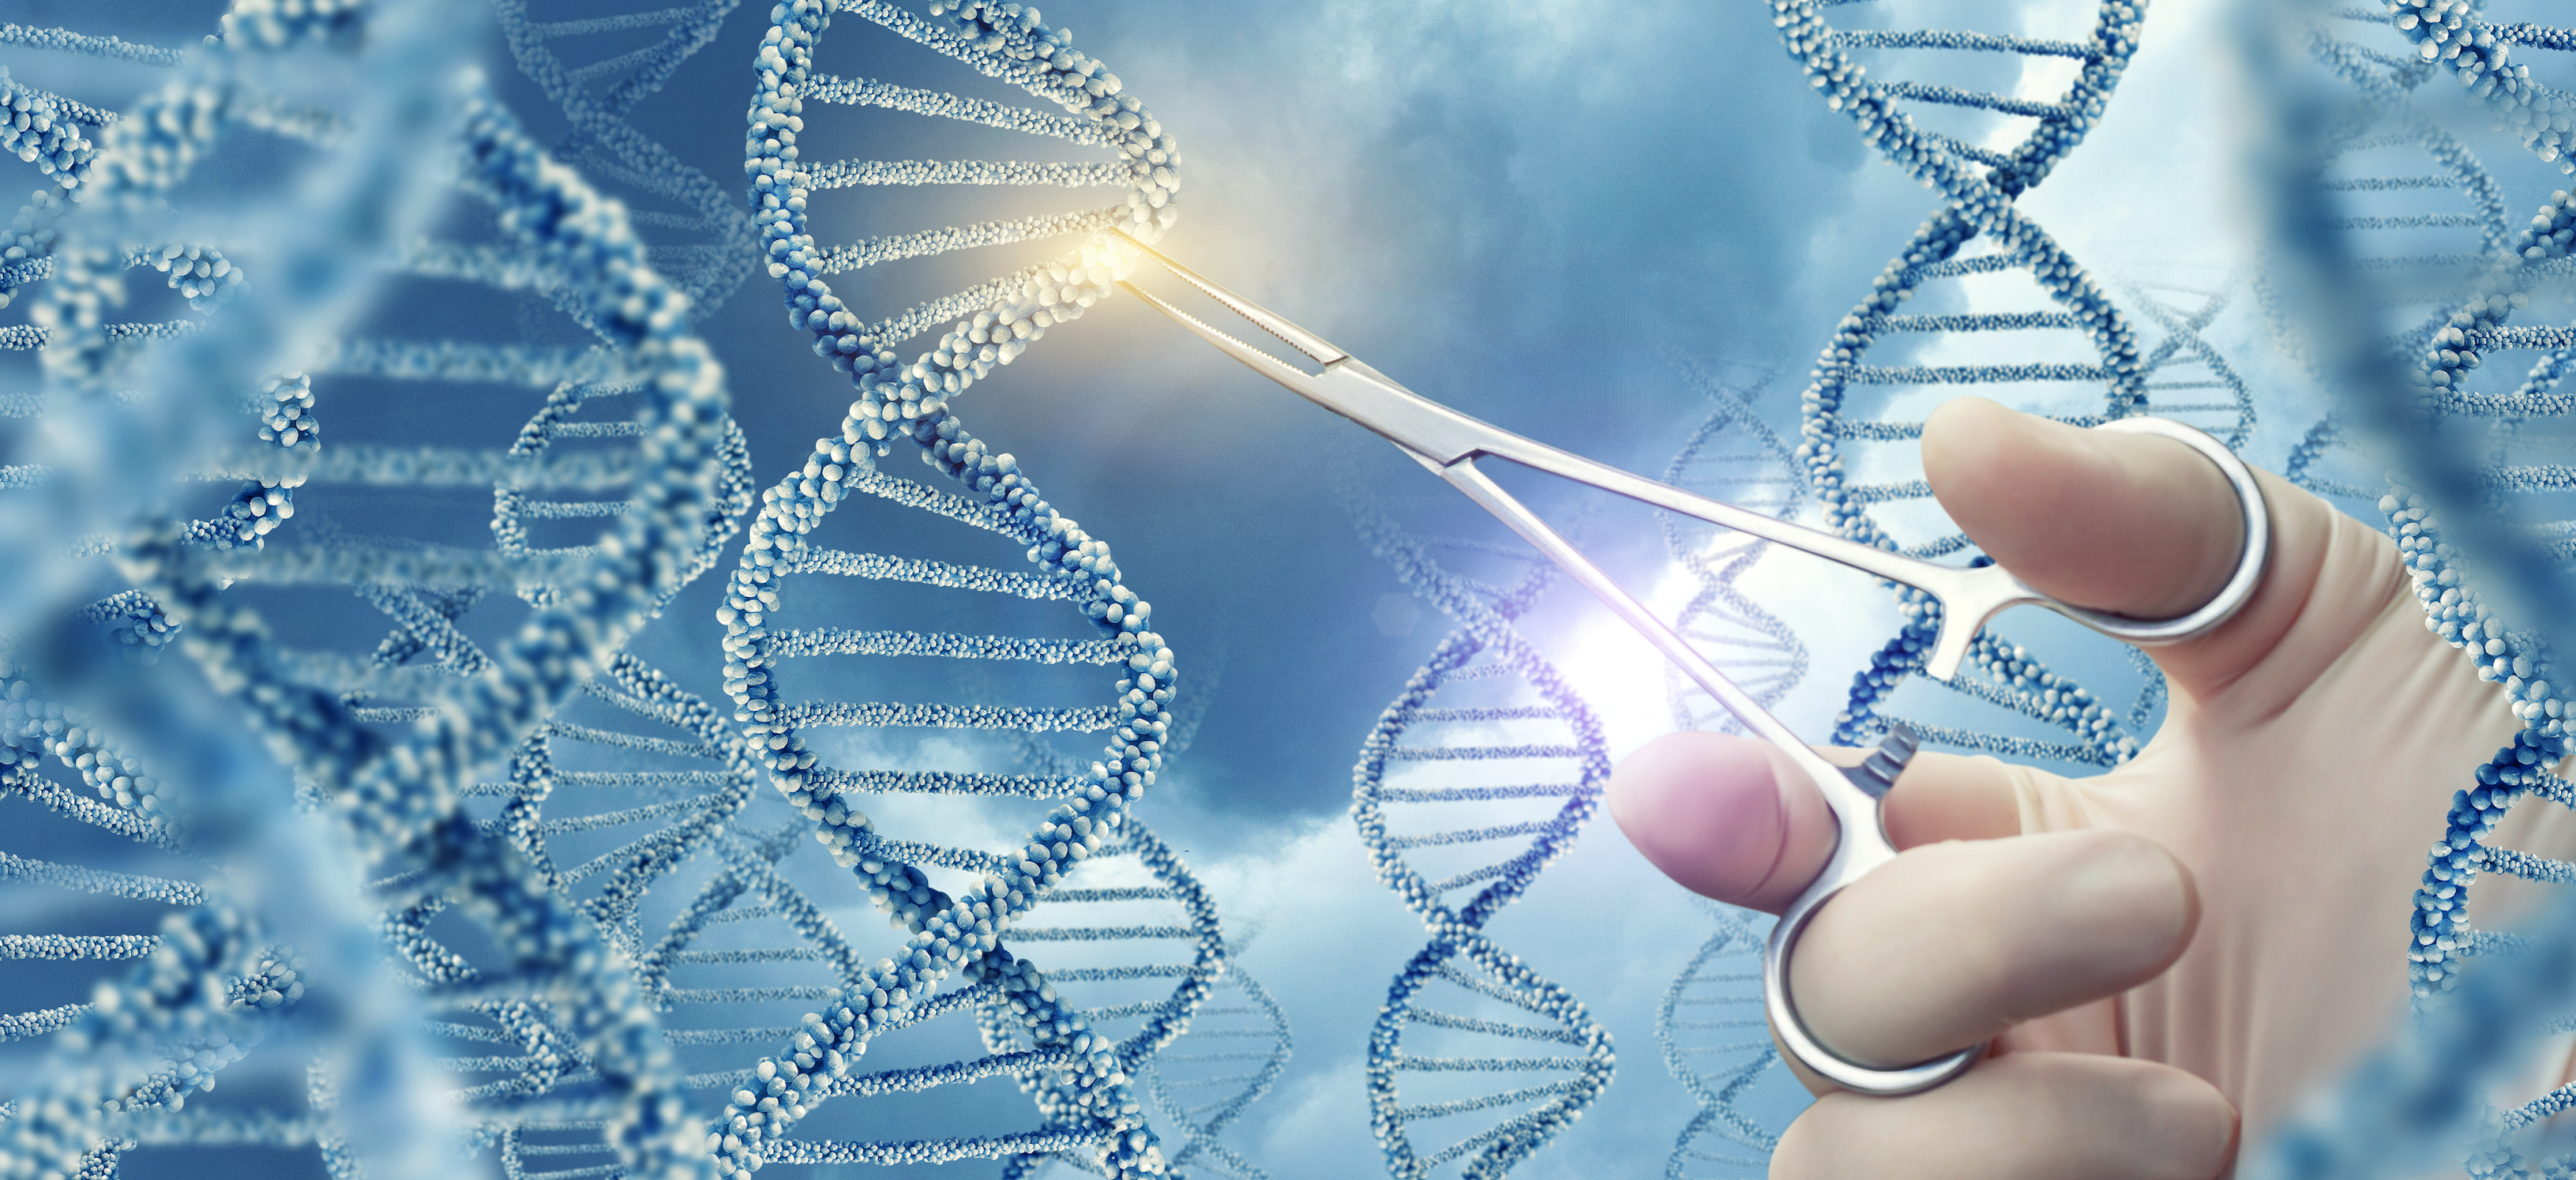 Combining gene therapy and medical device makes progress in RP